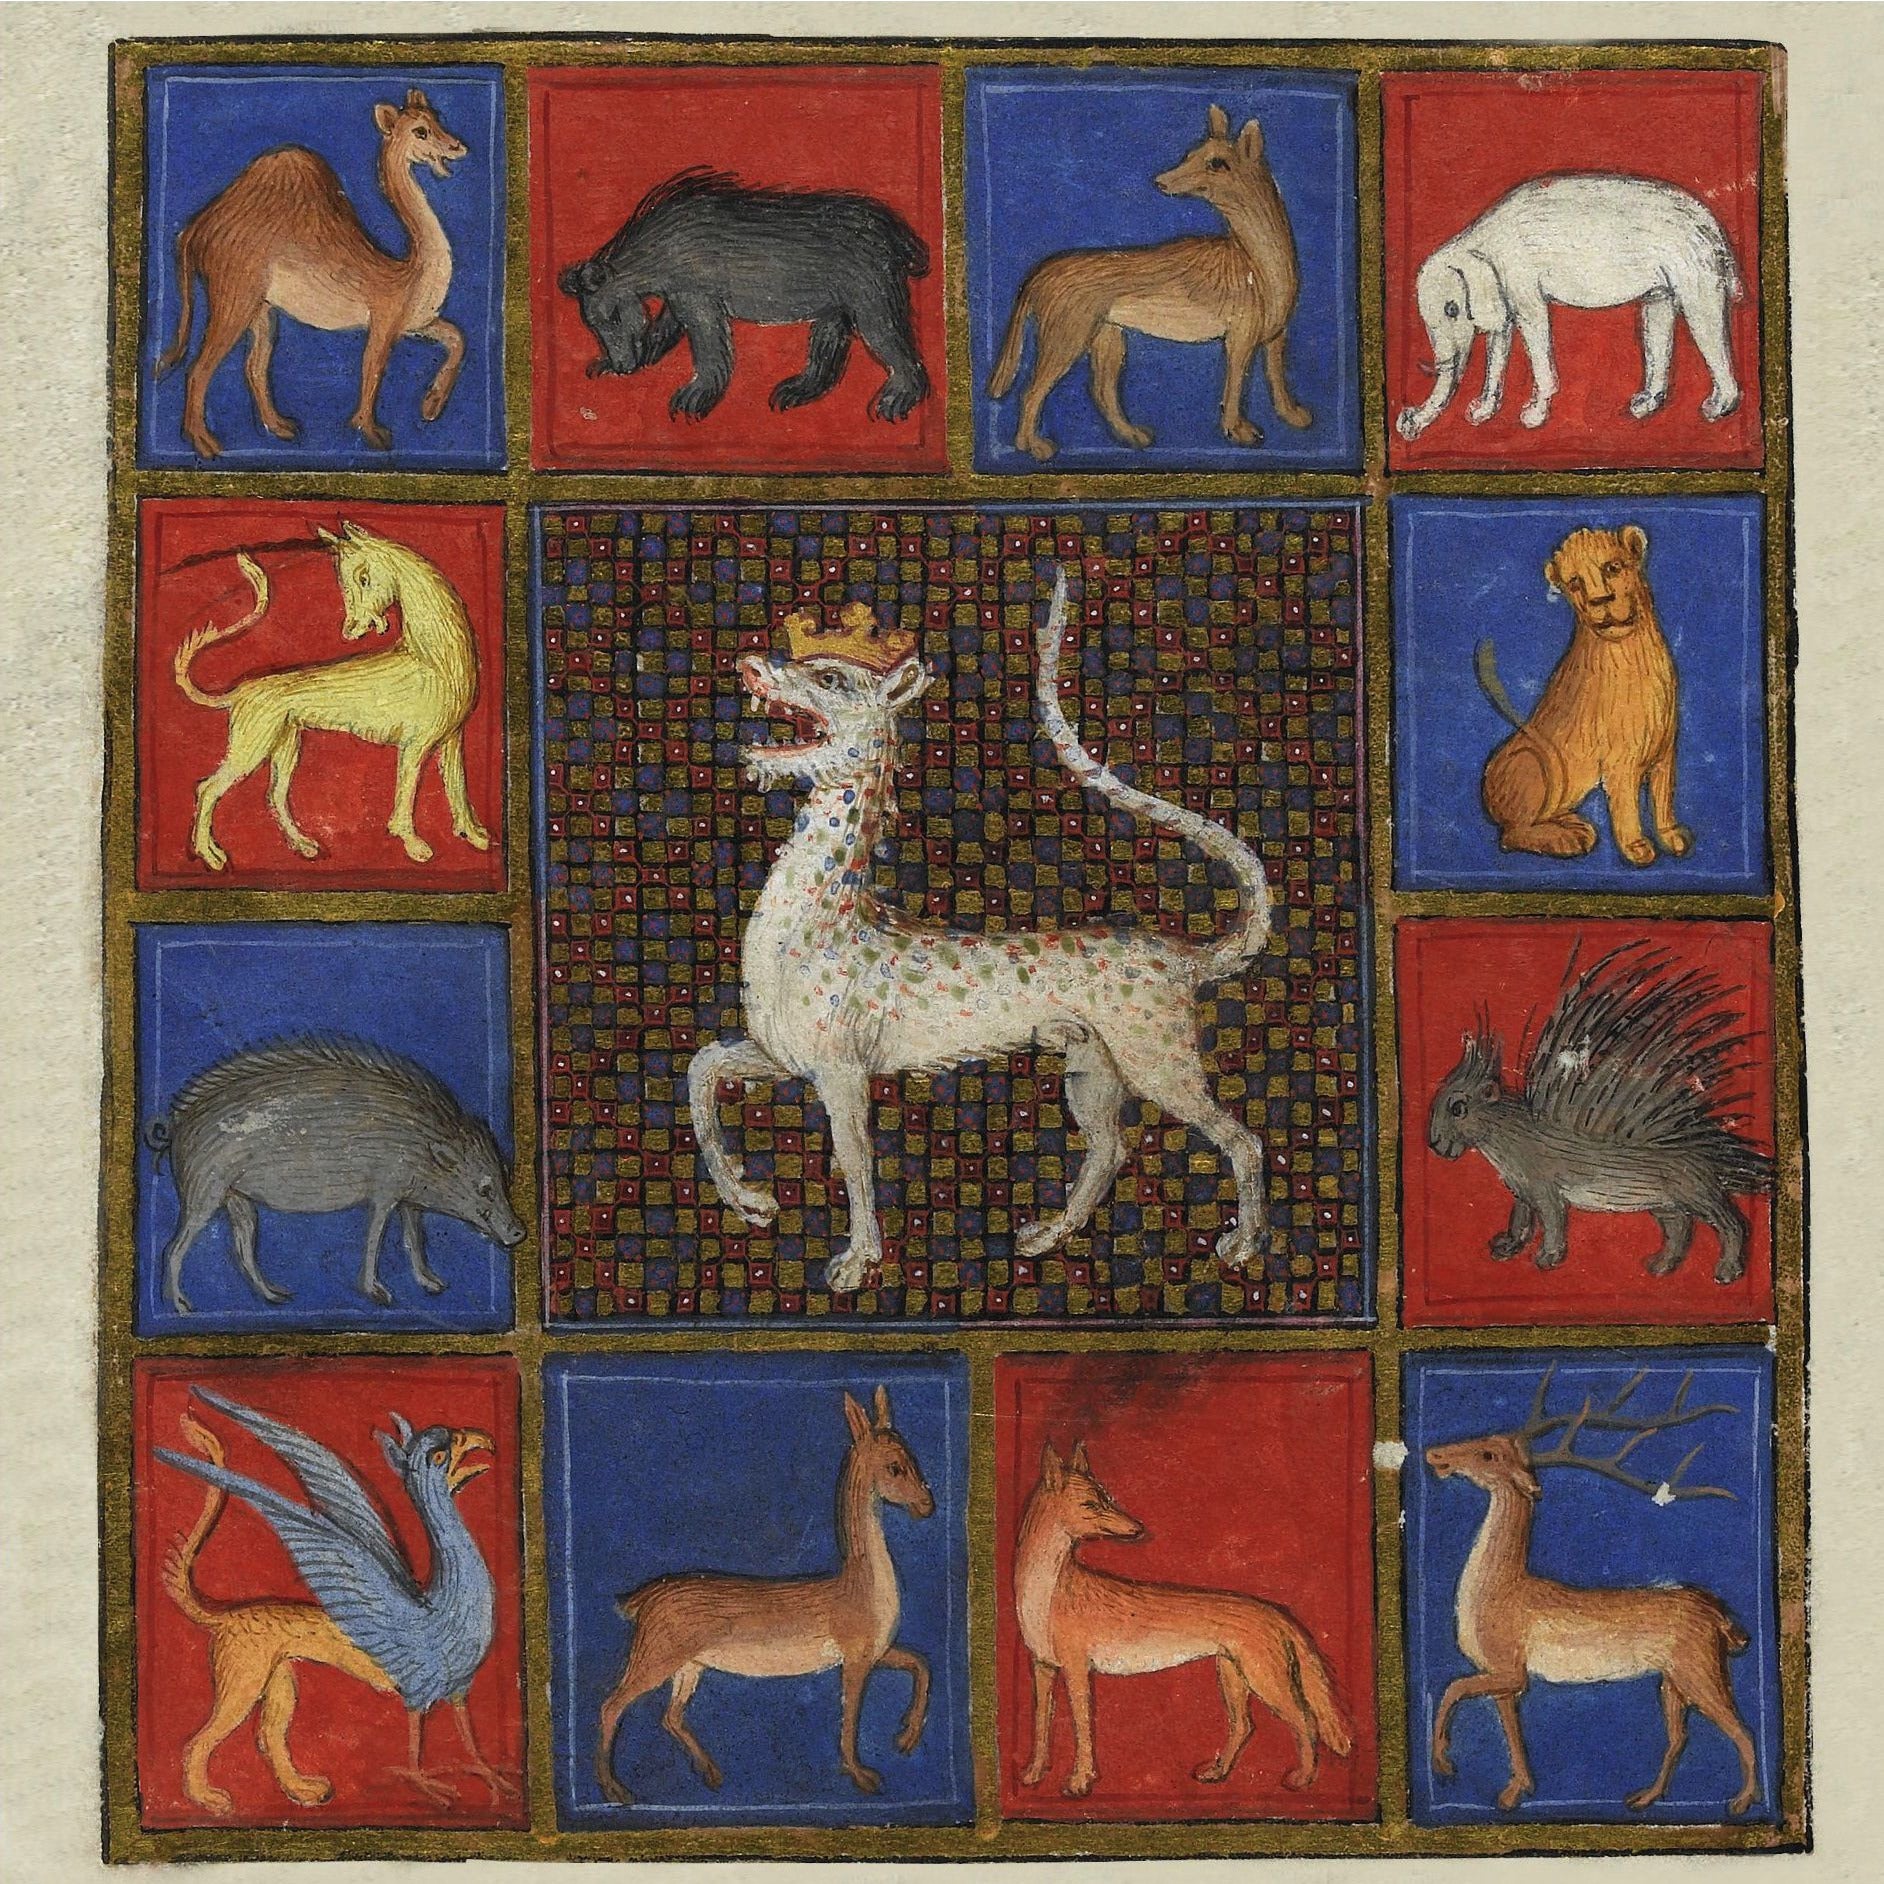 Square greeting card - animals of a bestiary illuminated manuscript illustration. Animals against red and blue squares including deer, a camel, an elephant, a porcupine, a unicorn and a griffin. From the collection of The Fitzwilliam Museum, brought to you by CuratingCambridge.com